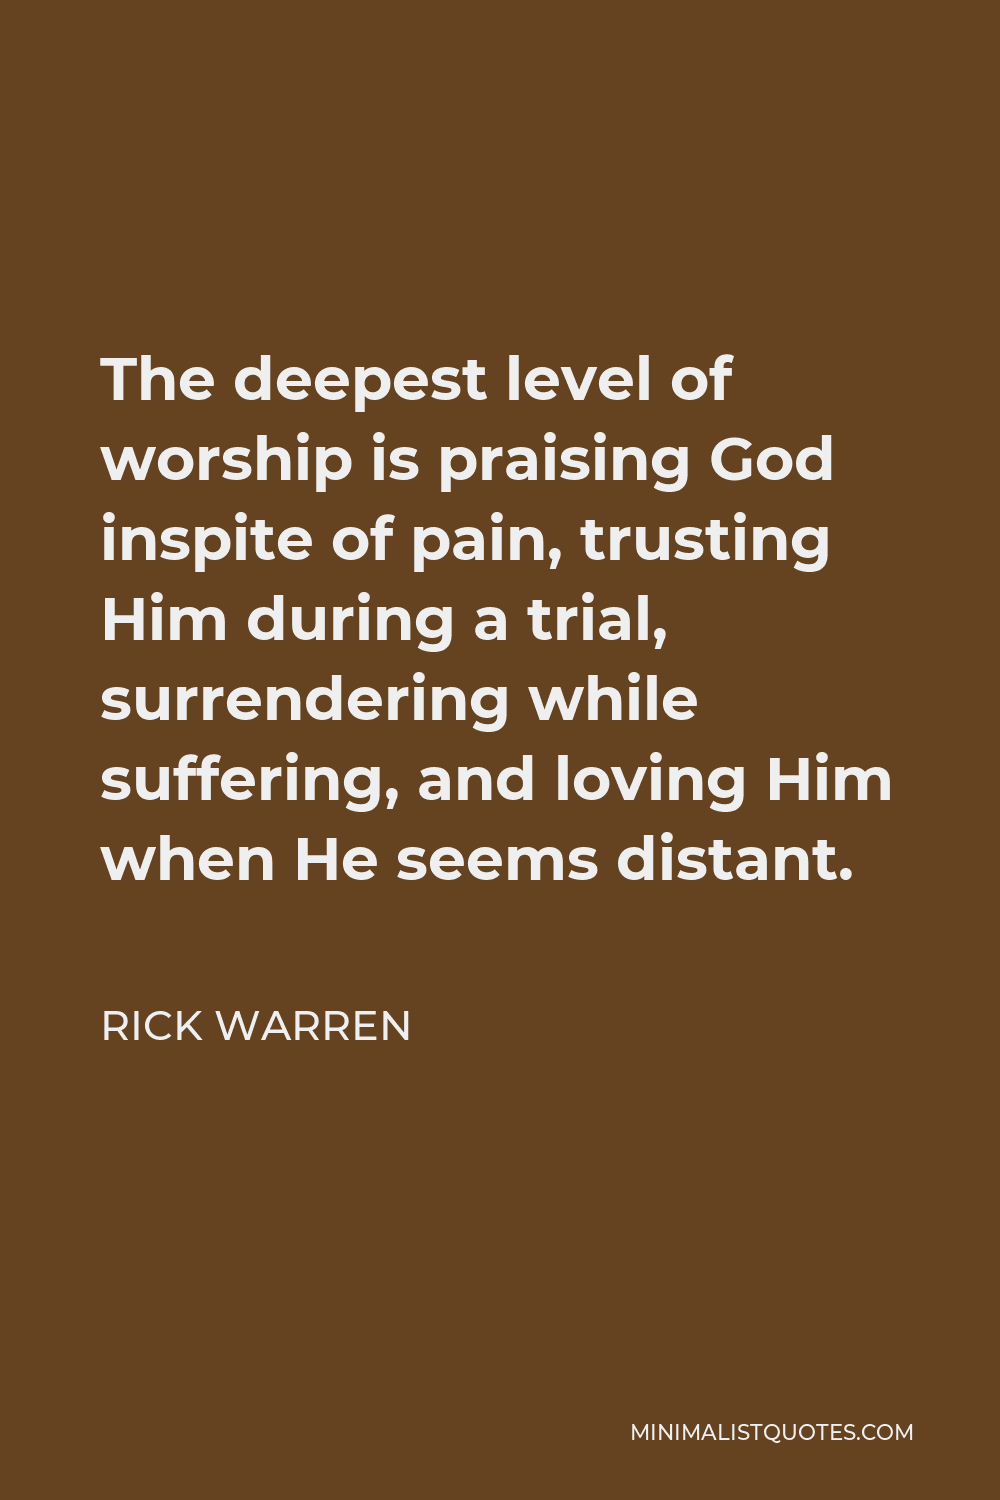 Rick Warren Quote - The deepest level of worship is praising God inspite of pain, trusting Him during a trial, surrendering while suffering, and loving Him when He seems distant.